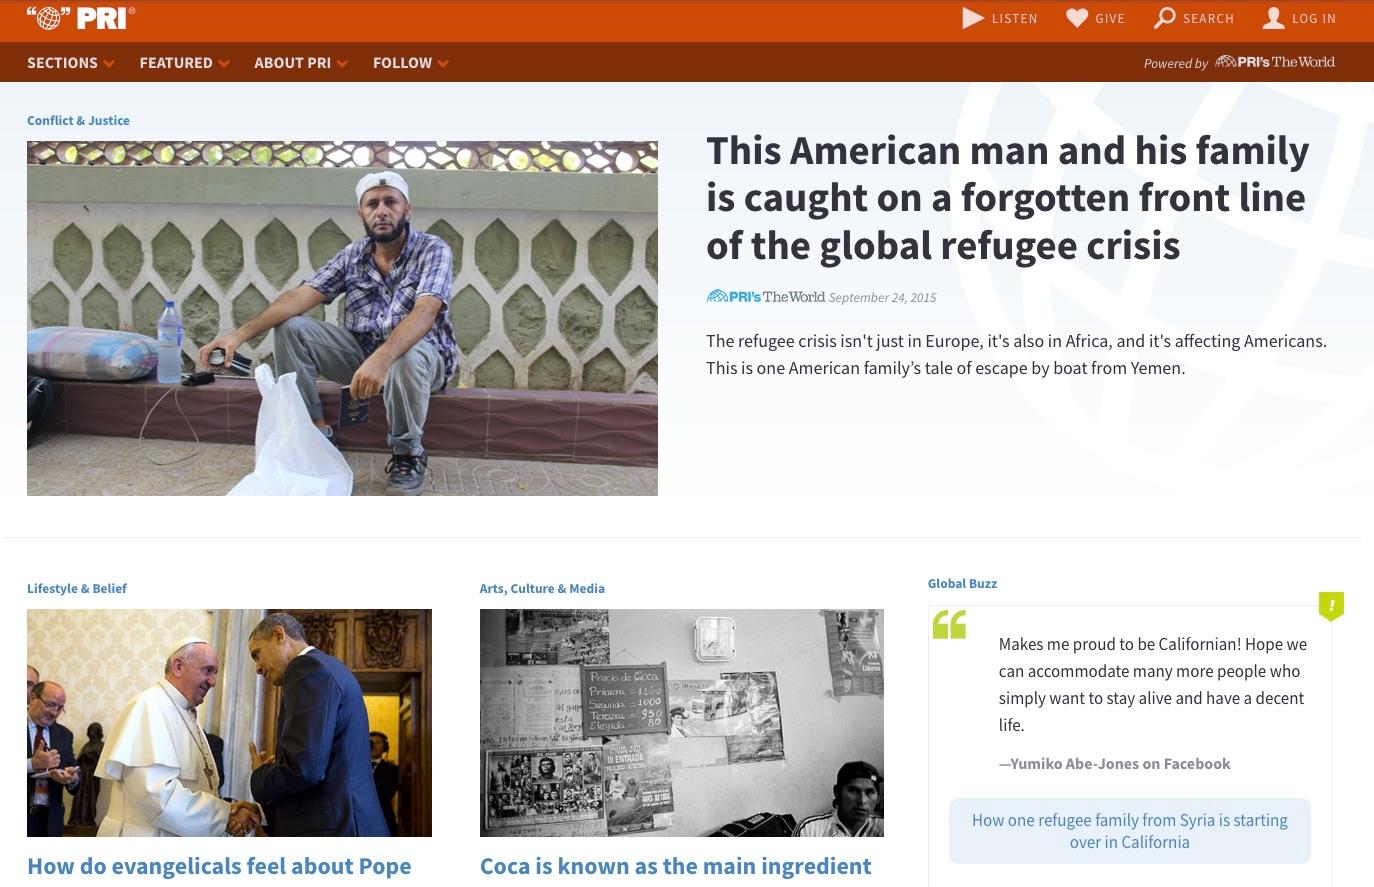 The World's website in 2015 featured a story about a global refugee crisis.